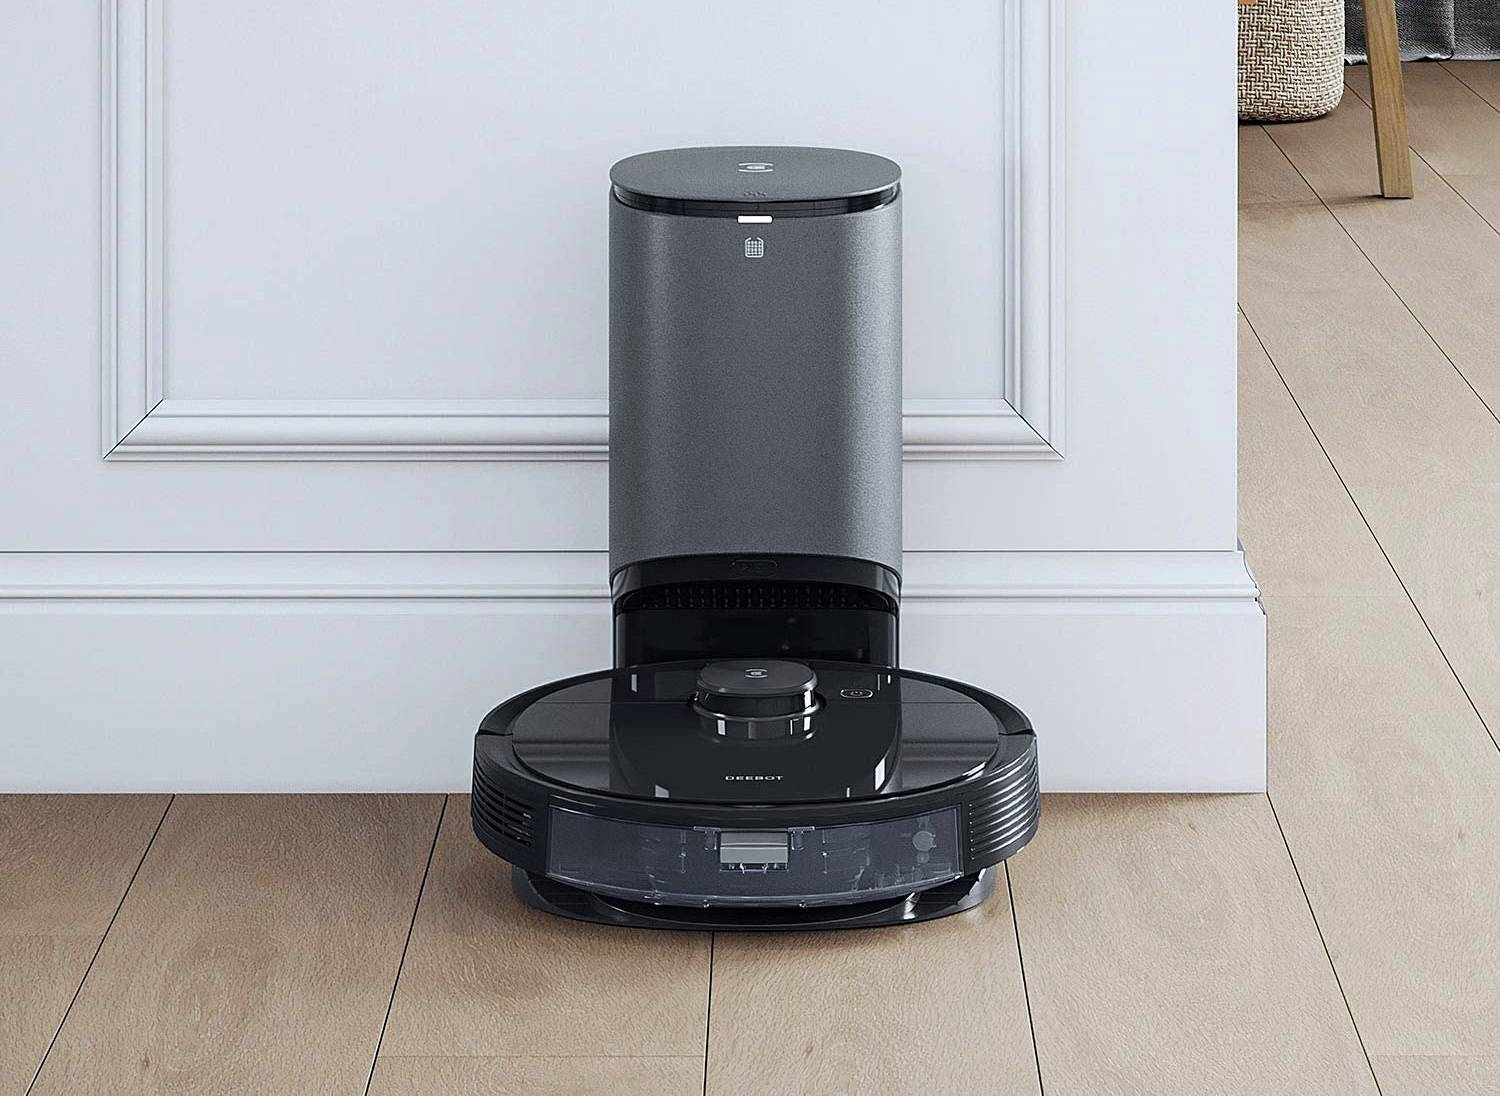 Amazon coupon slashes our favourite self-emptying robot vacuum to its lowest tag ever